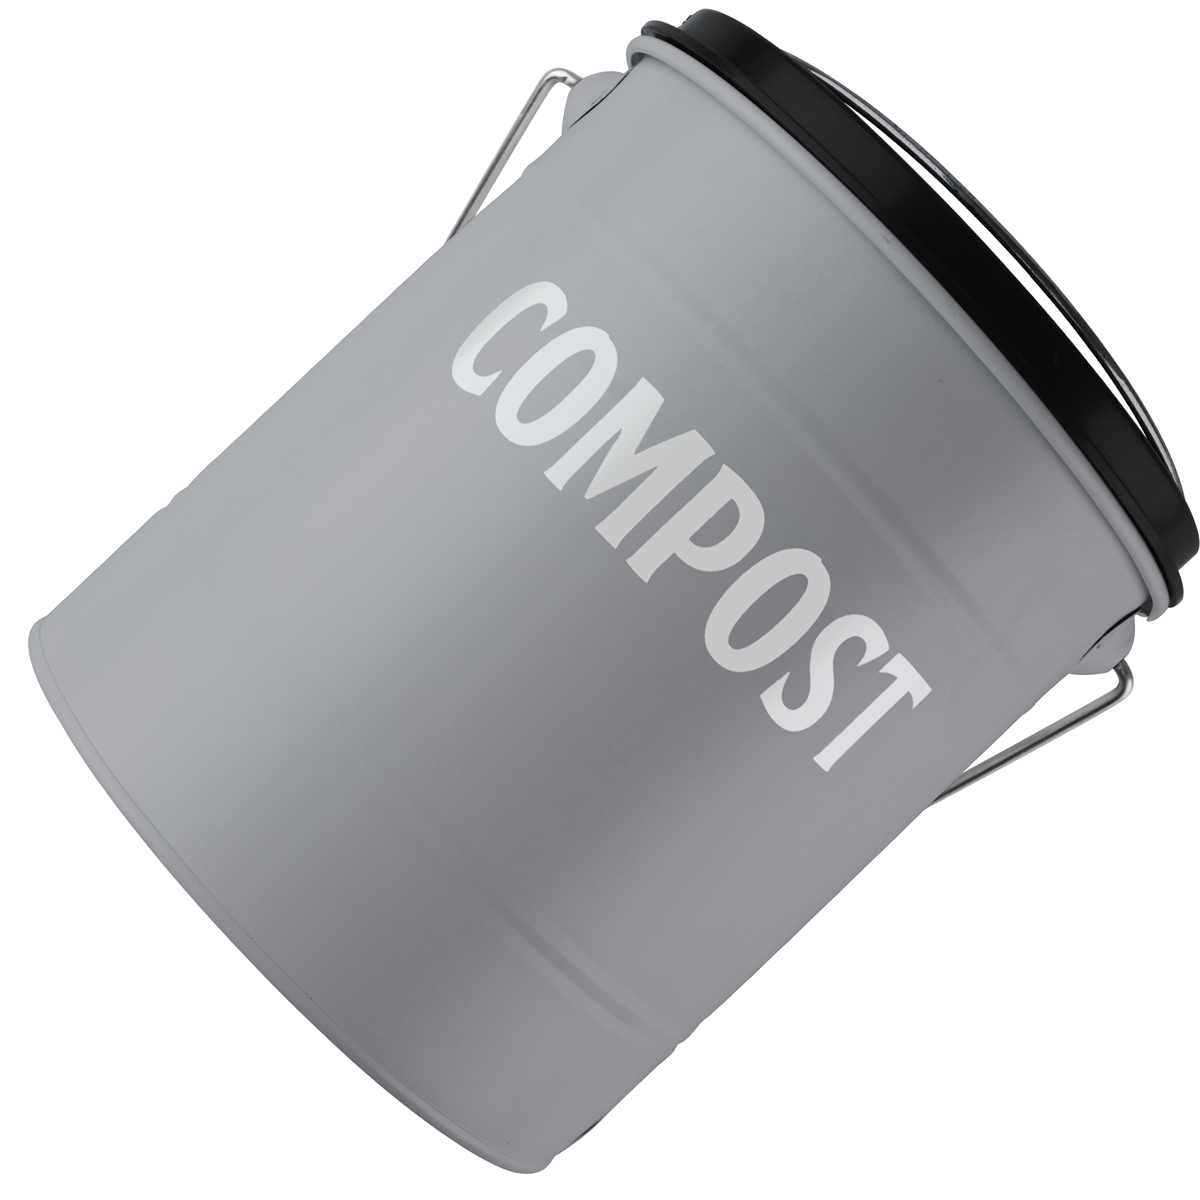 Gray Compost Bin side view without the lid